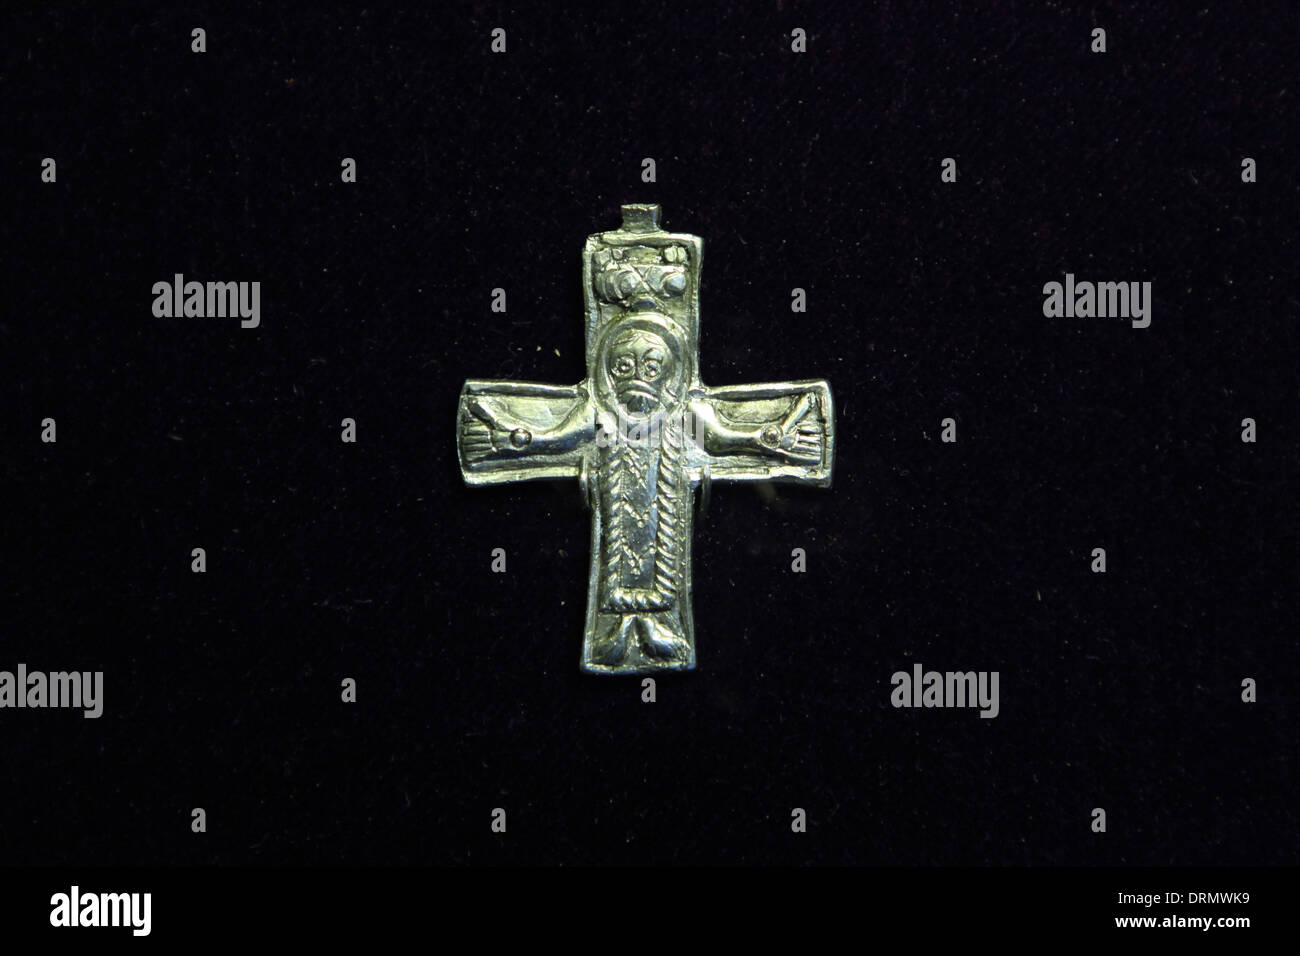 Great Moravian Empire. Silver cross with the image of the crucified Christ from the 9th century, found in Mikulcice. Stock Photo